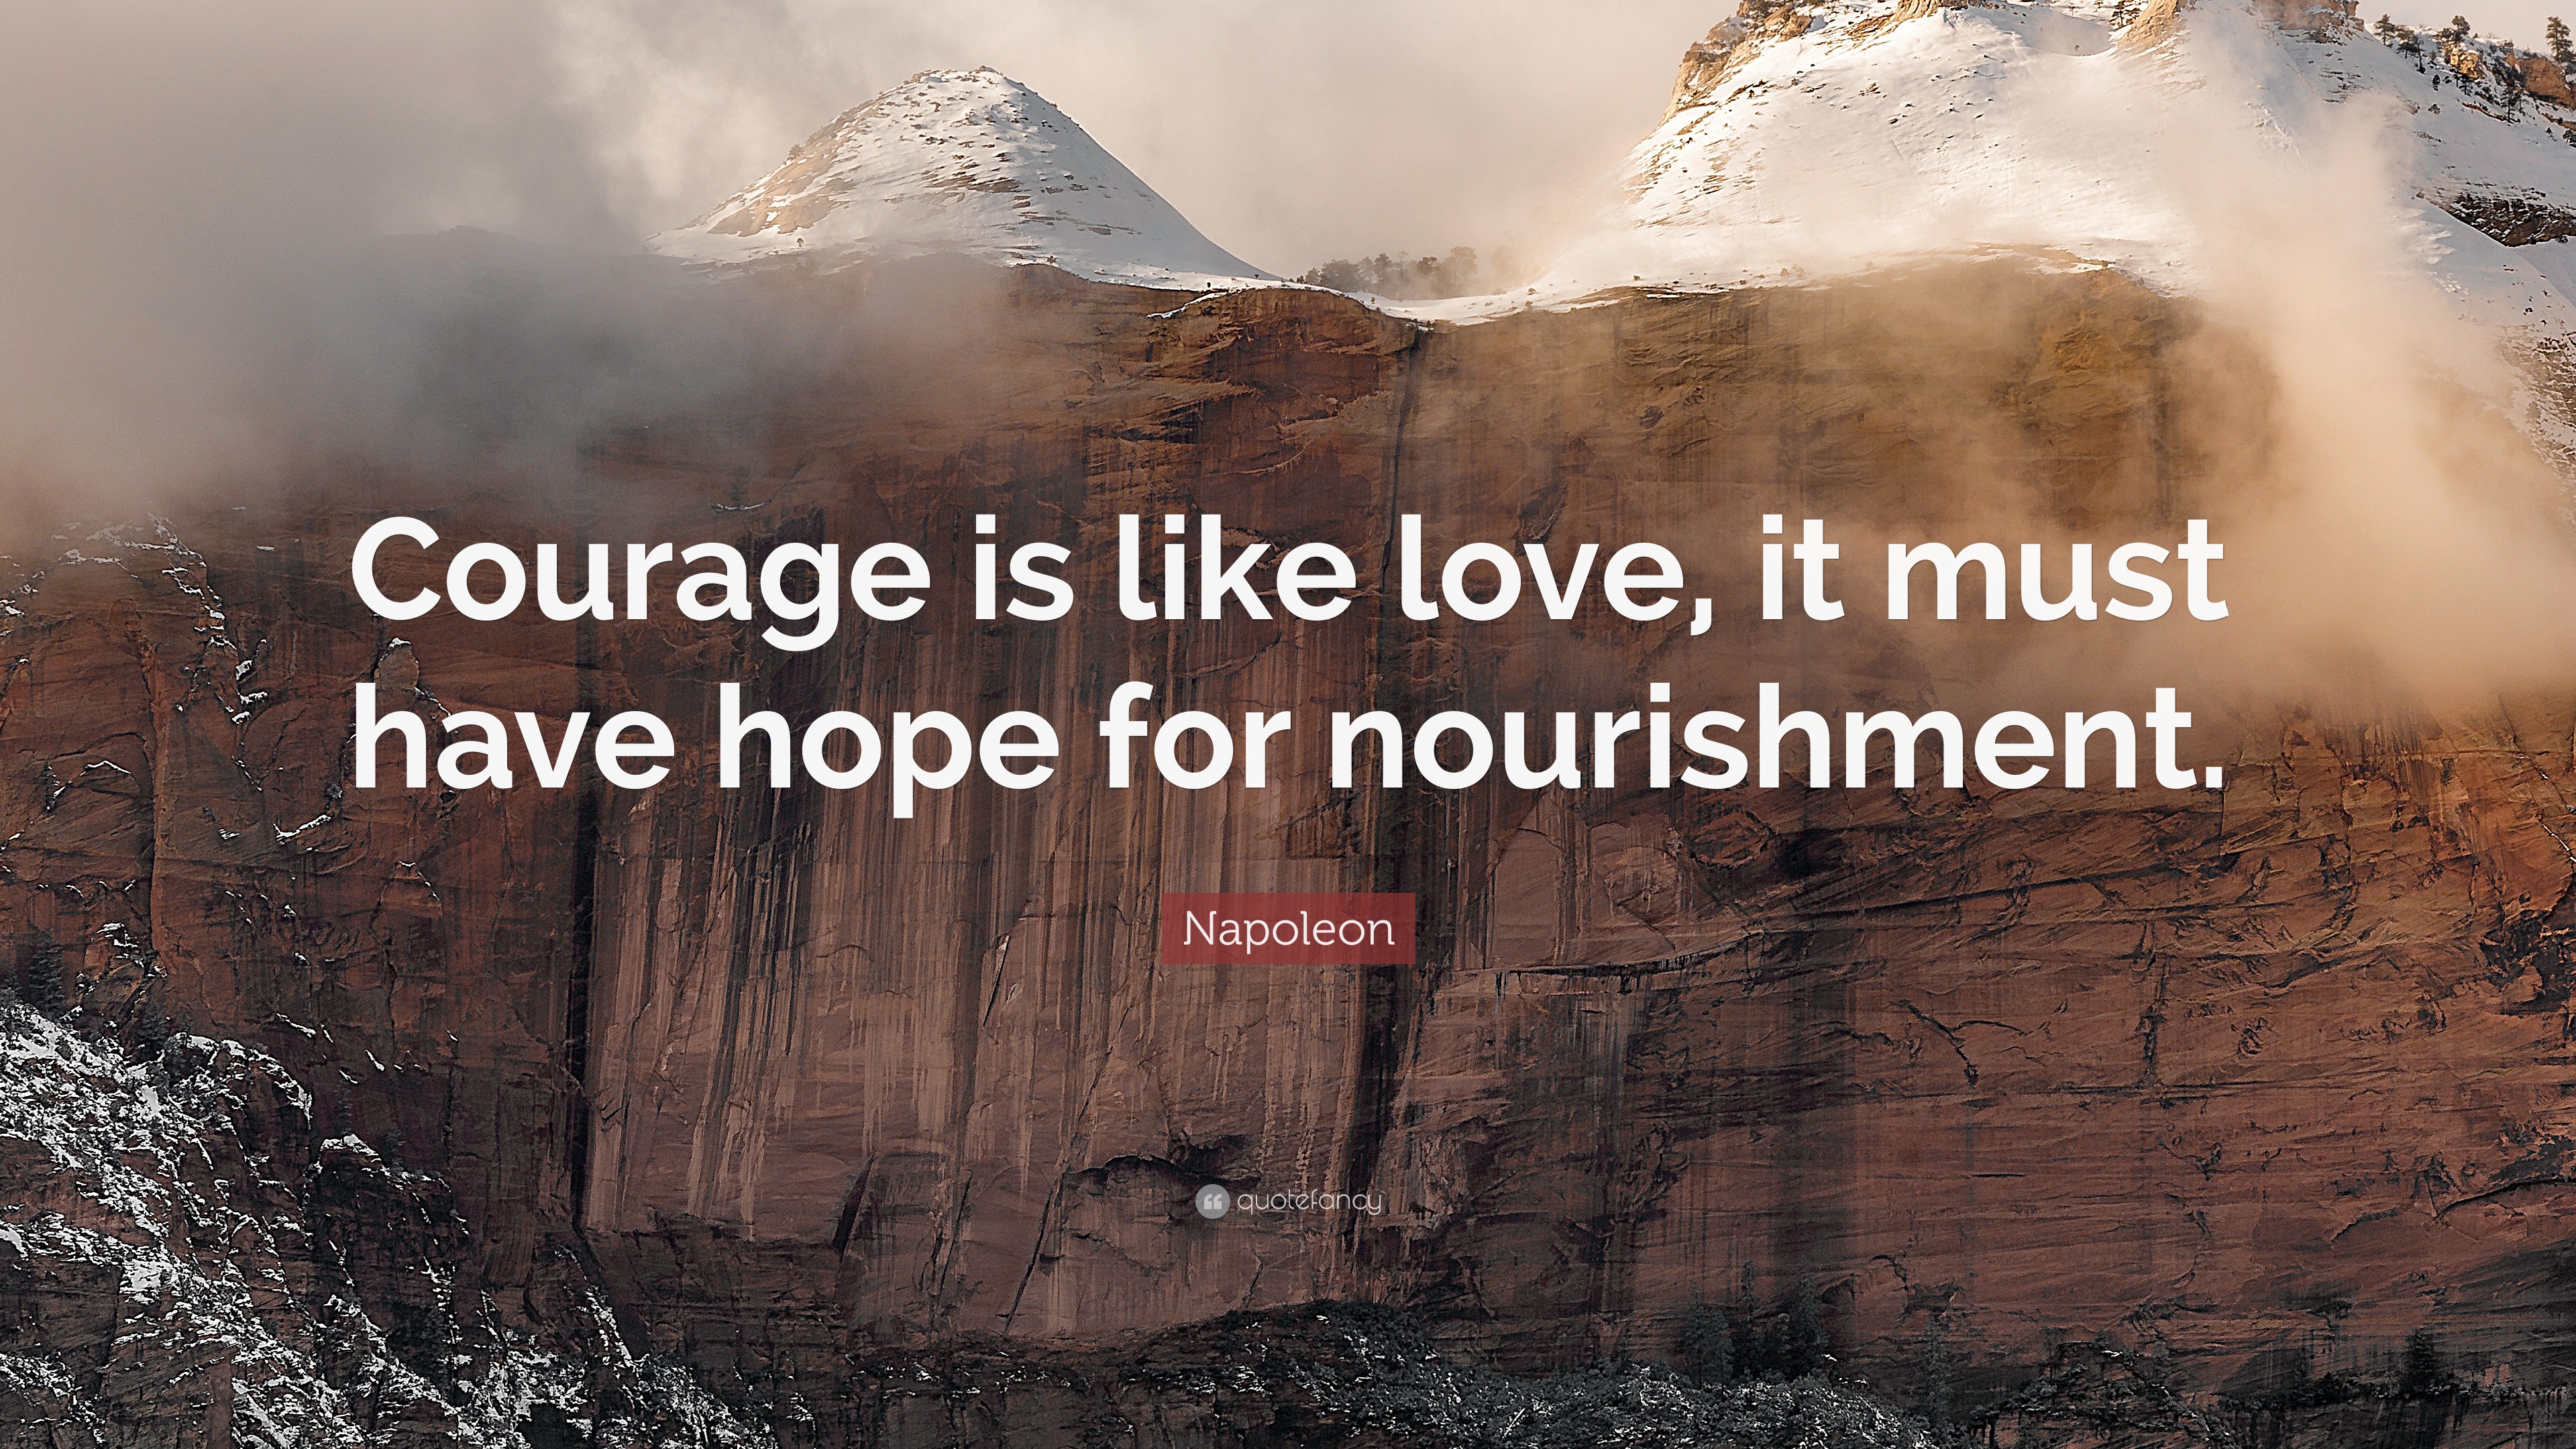 Napoleon Quote: "Courage is like love, it must have hope ...